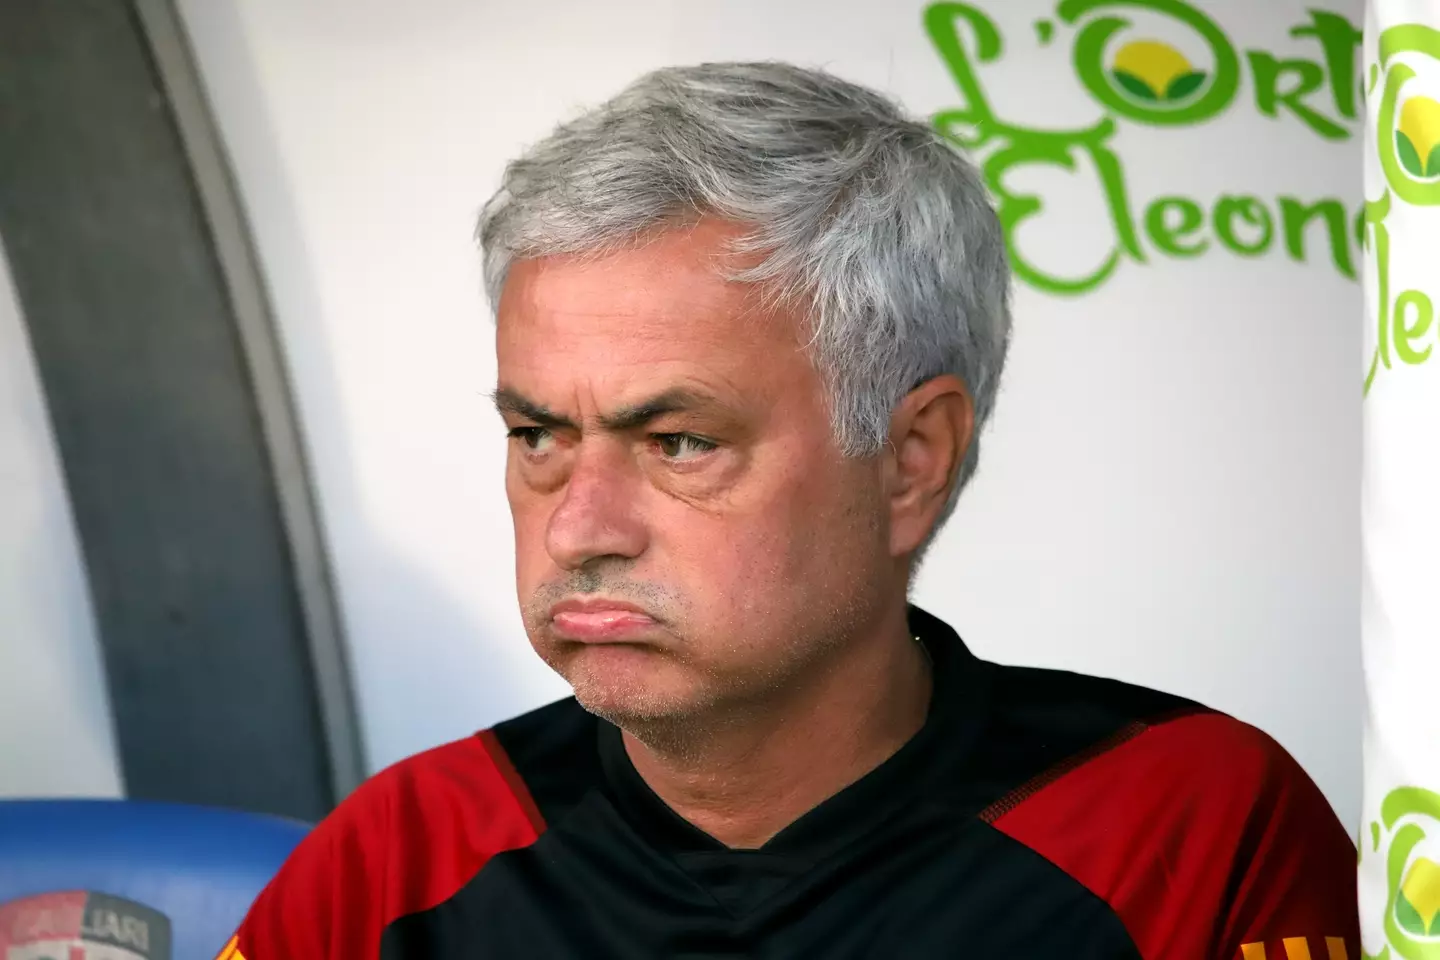 Jose Mourinho has reportedly been shortlisted for the Real Madrid job.